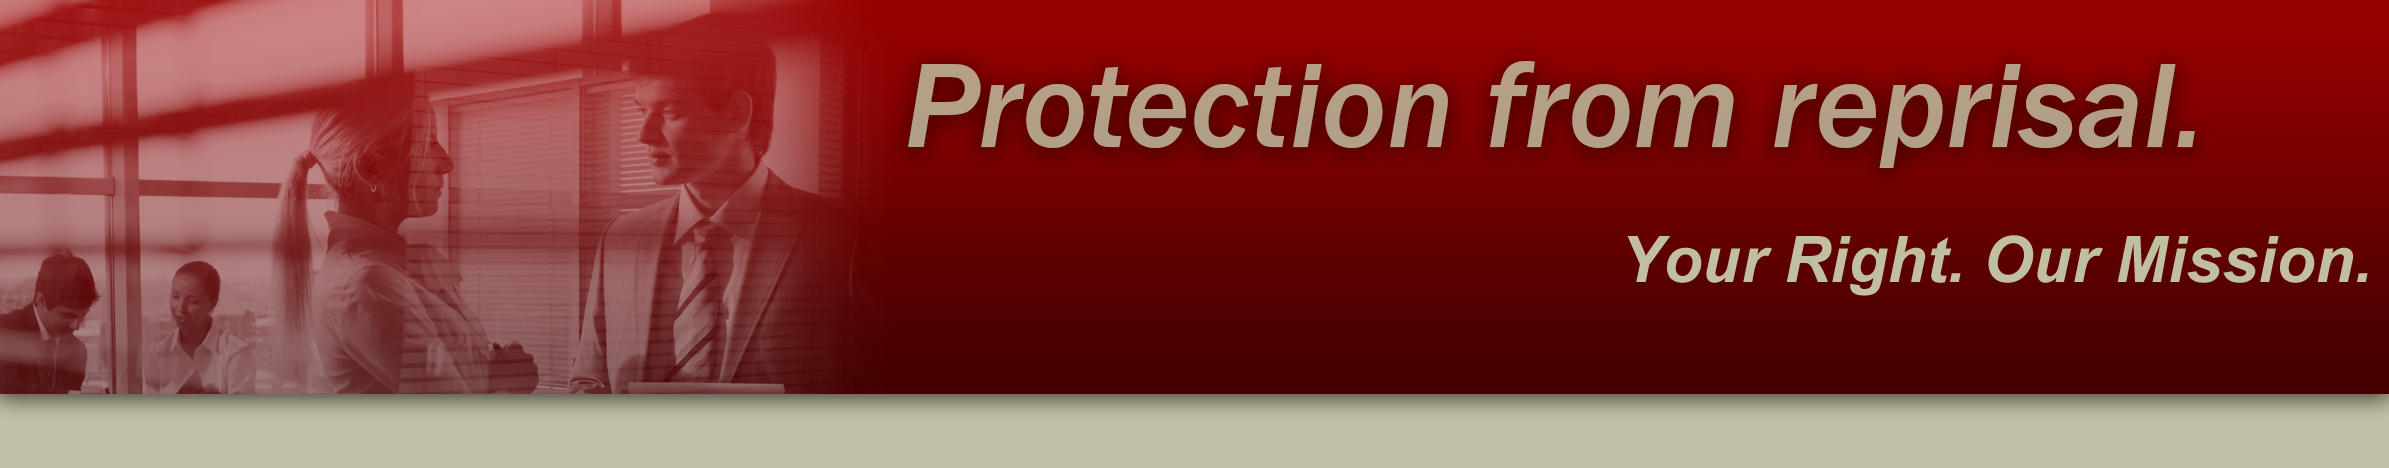 Protection from reprisal. Your right. Our mission.